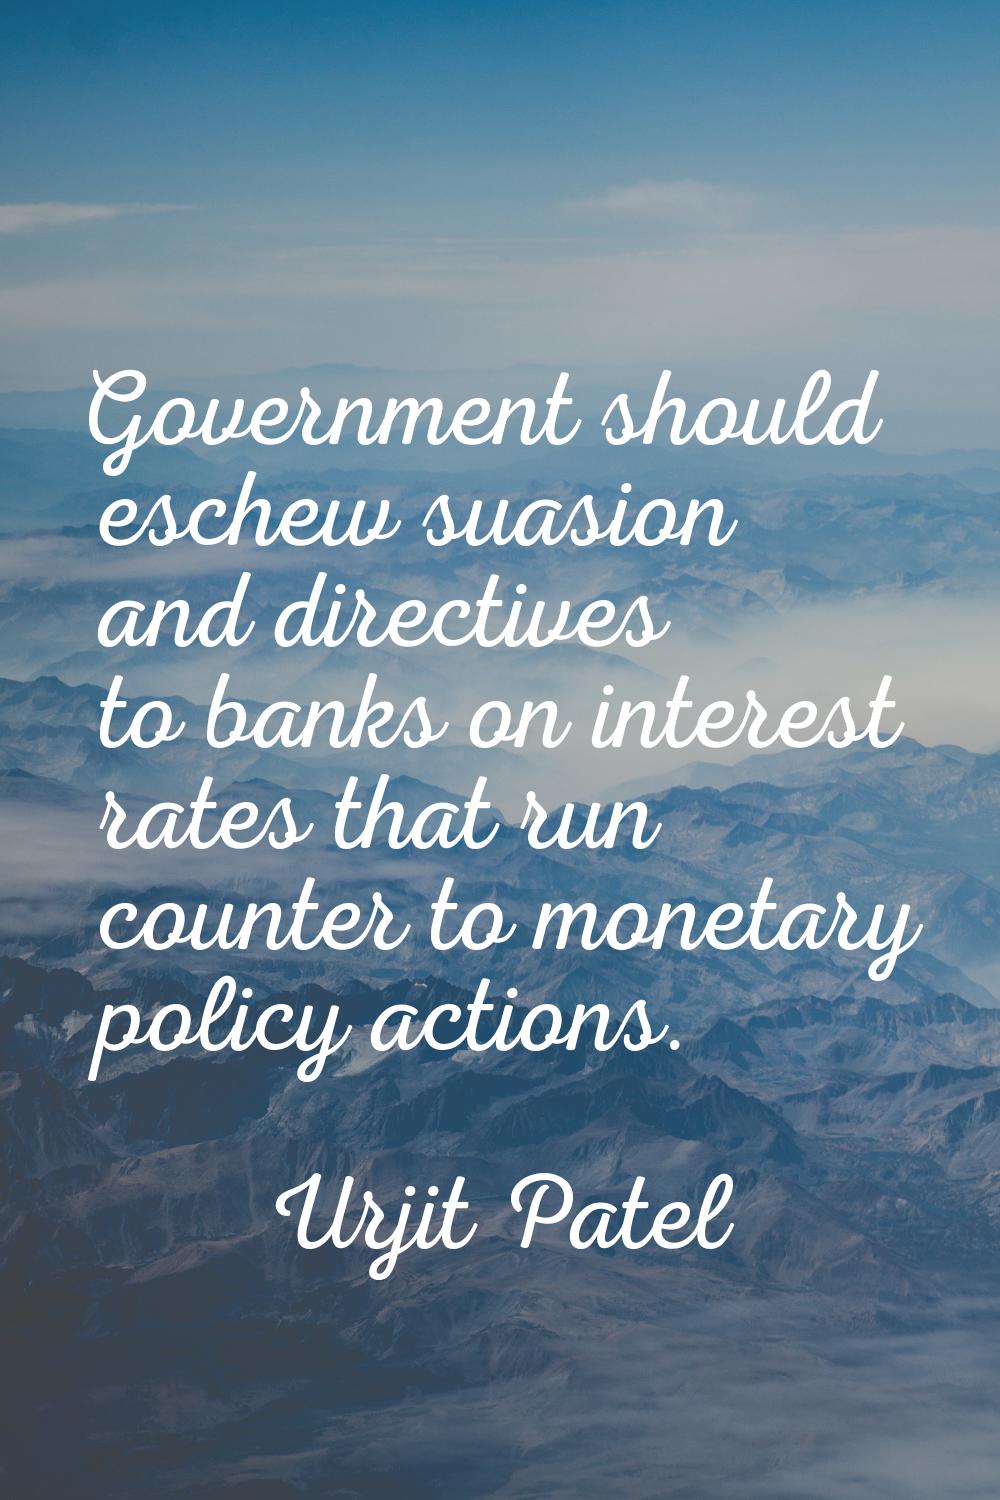 Government should eschew suasion and directives to banks on interest rates that run counter to mone